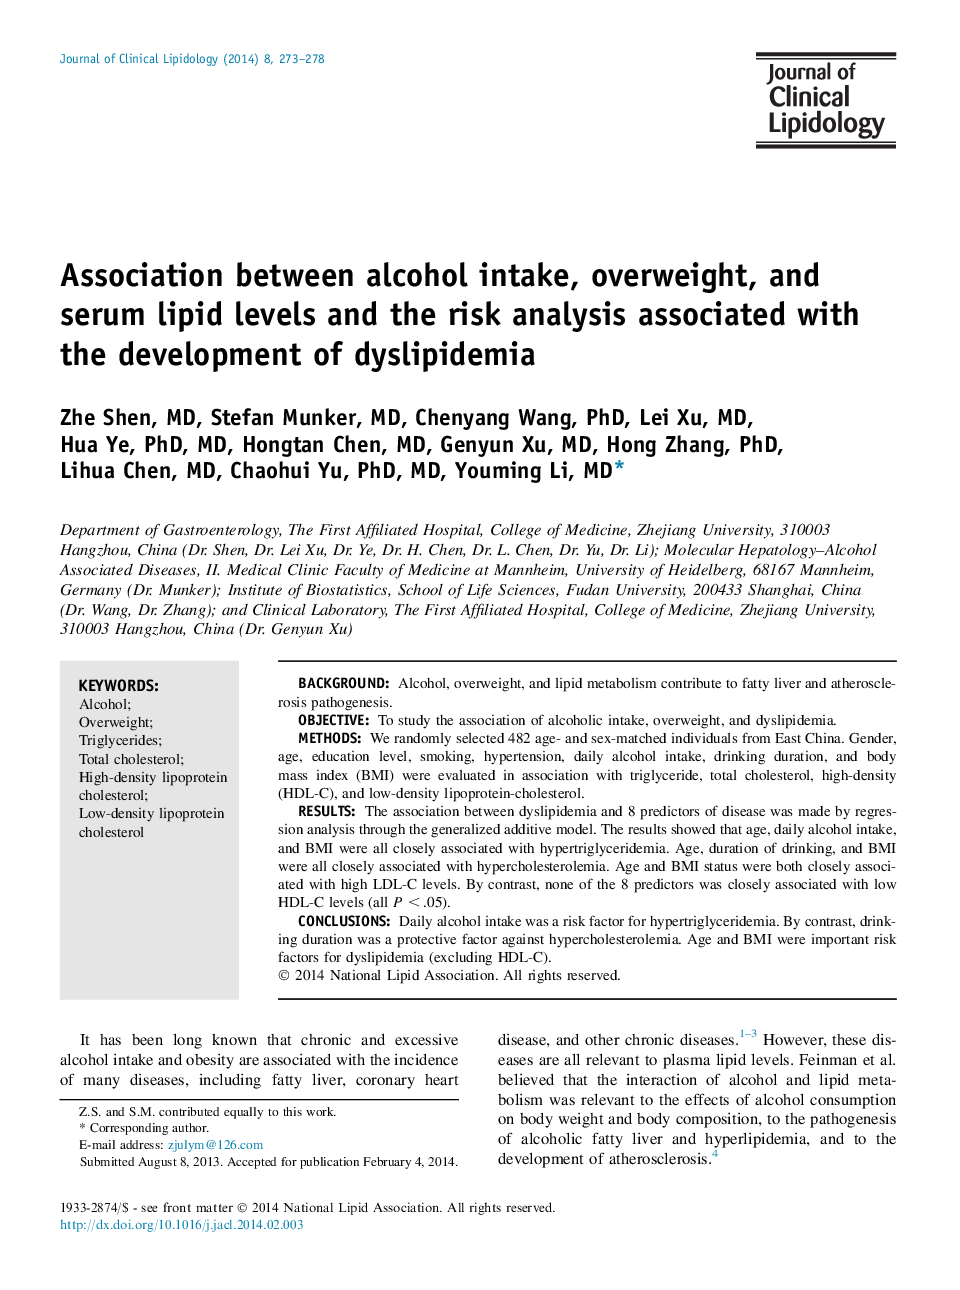 Association between alcohol intake, overweight, and serum lipid levels and the risk analysis associated with the development of dyslipidemia 